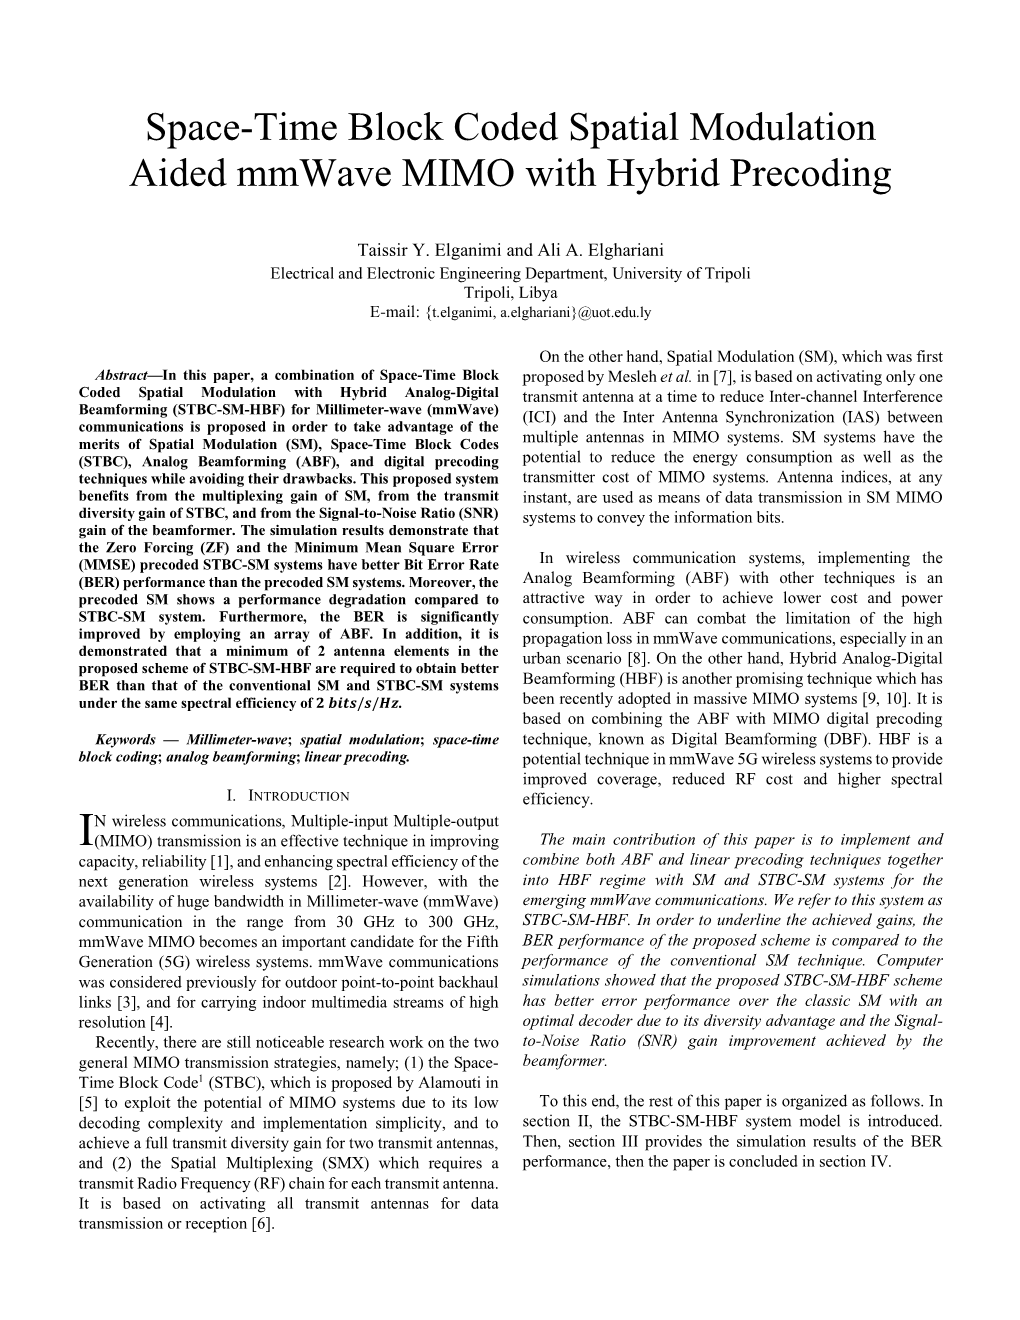 Space-Time Block Coded Spatial Modulation Aided Mmwave MIMO with Hybrid Precoding